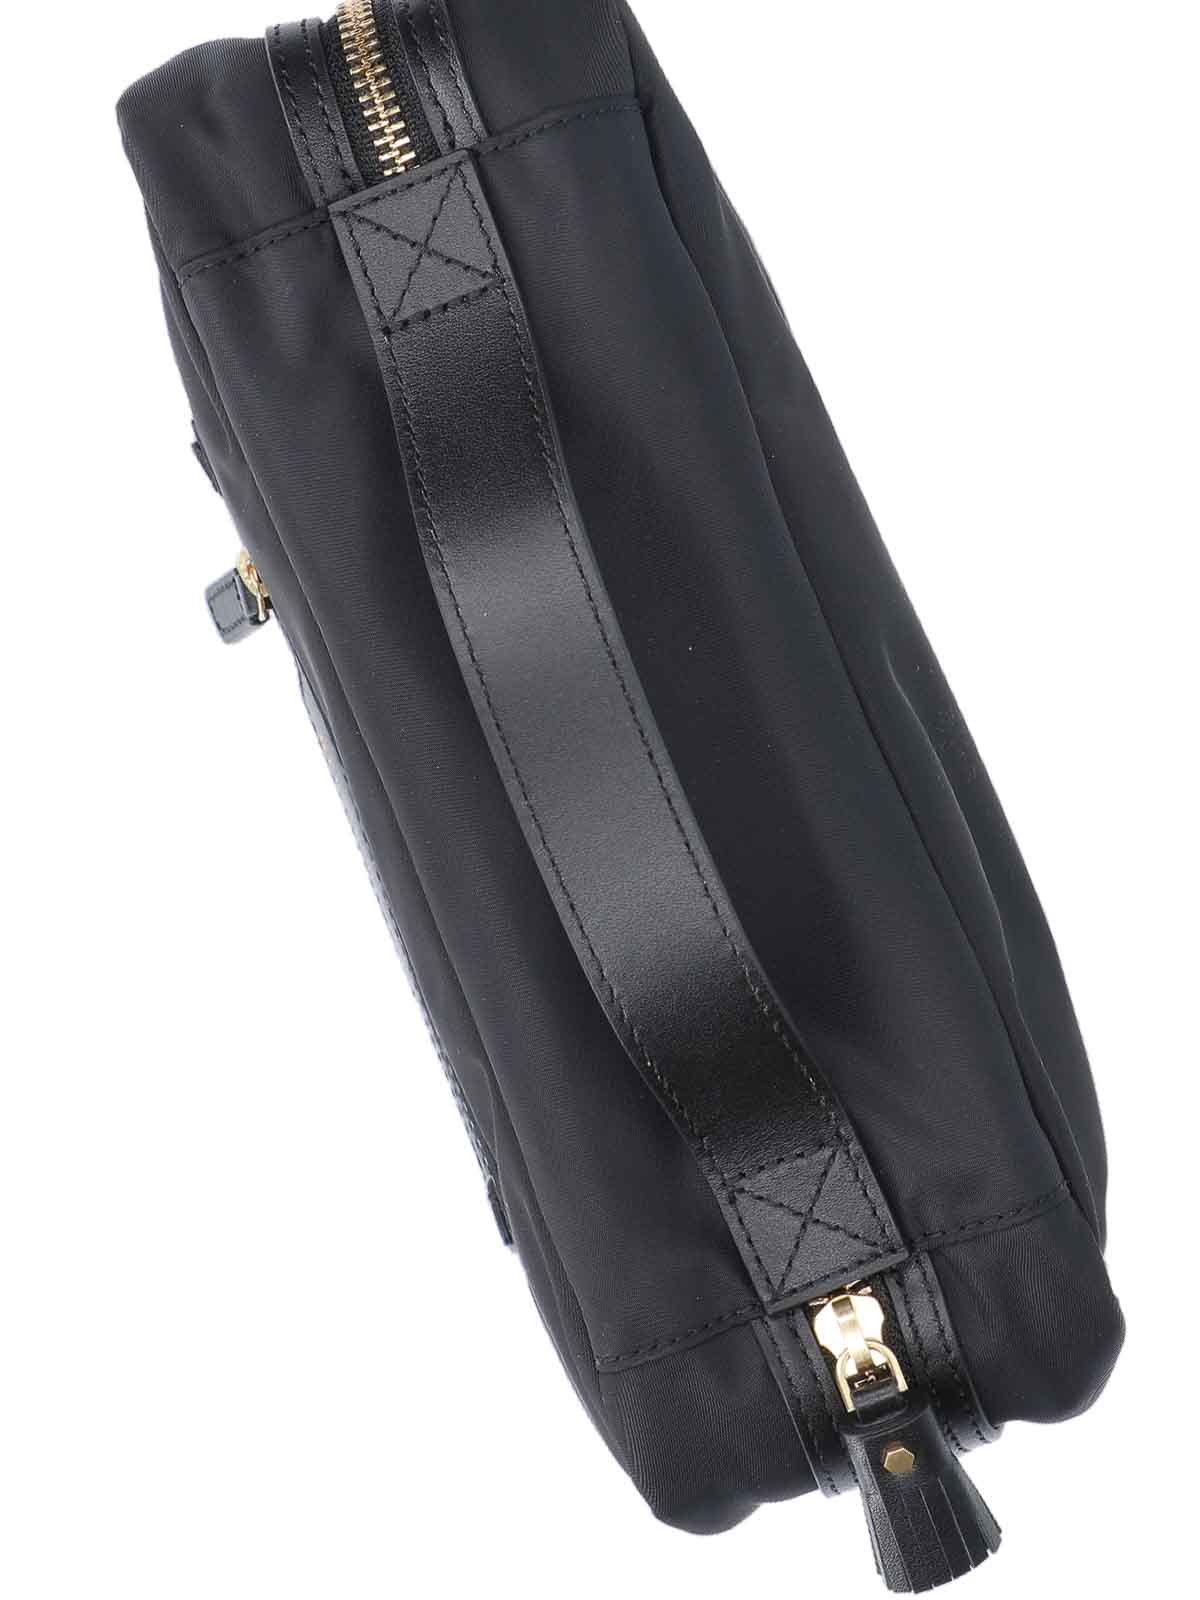 Shop Anya Hindmarch Pouch In Black